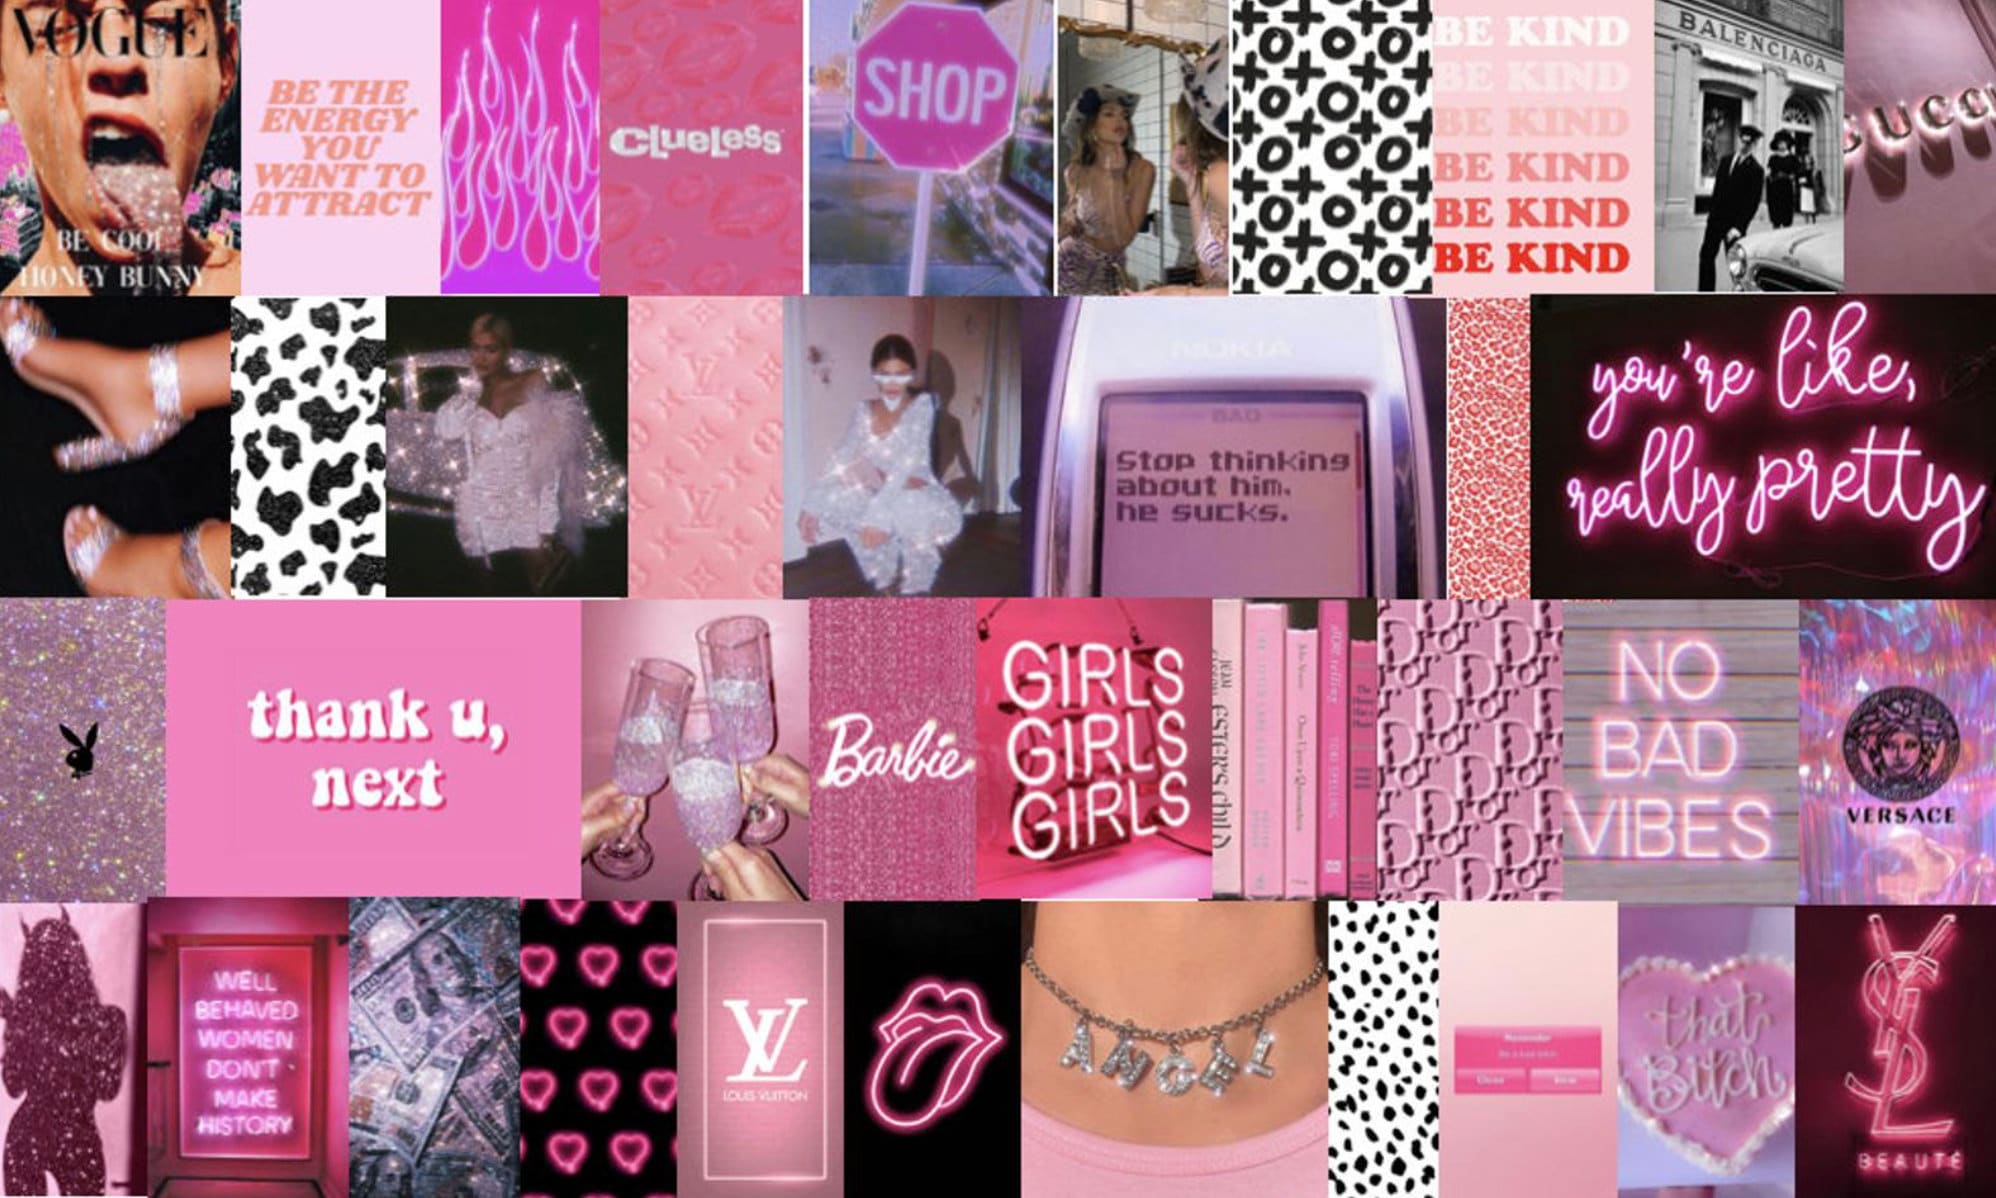 A collage of pink and black aesthetic images - Vogue, baddie